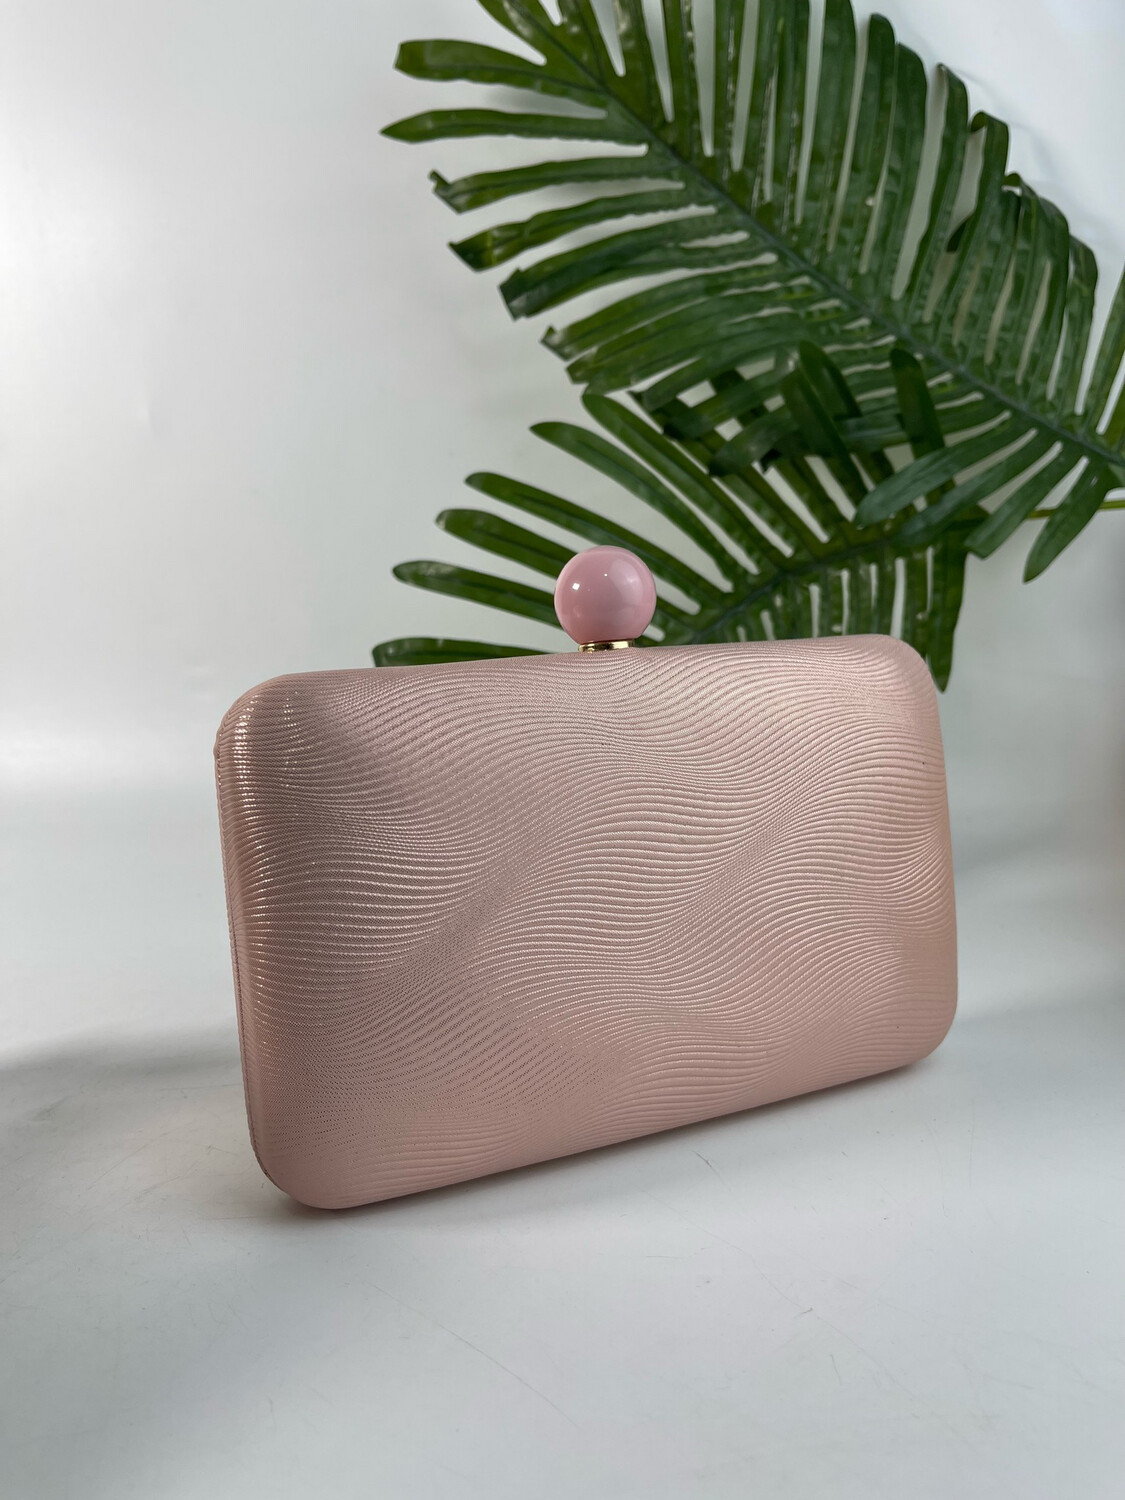 Nude Candy Inspired Purse